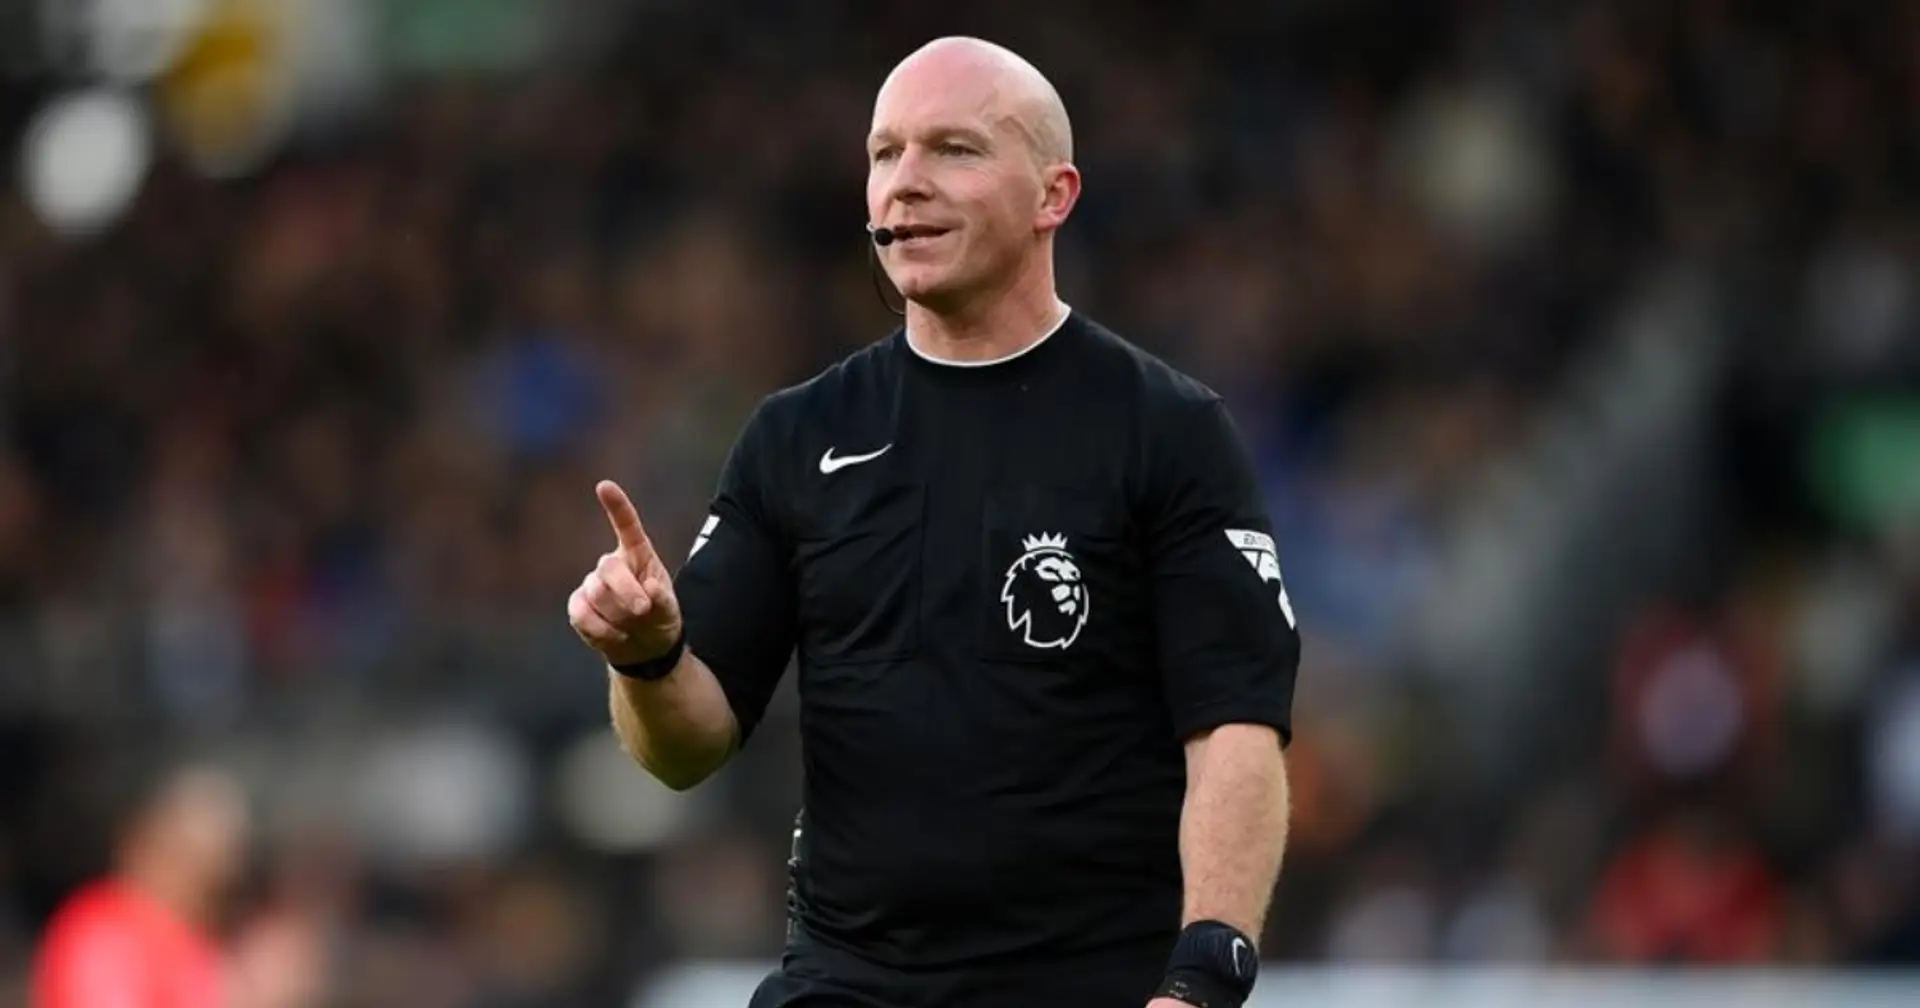 Referee appointed for Chelsea clash & 2 more under-radar stories at Arsenal today